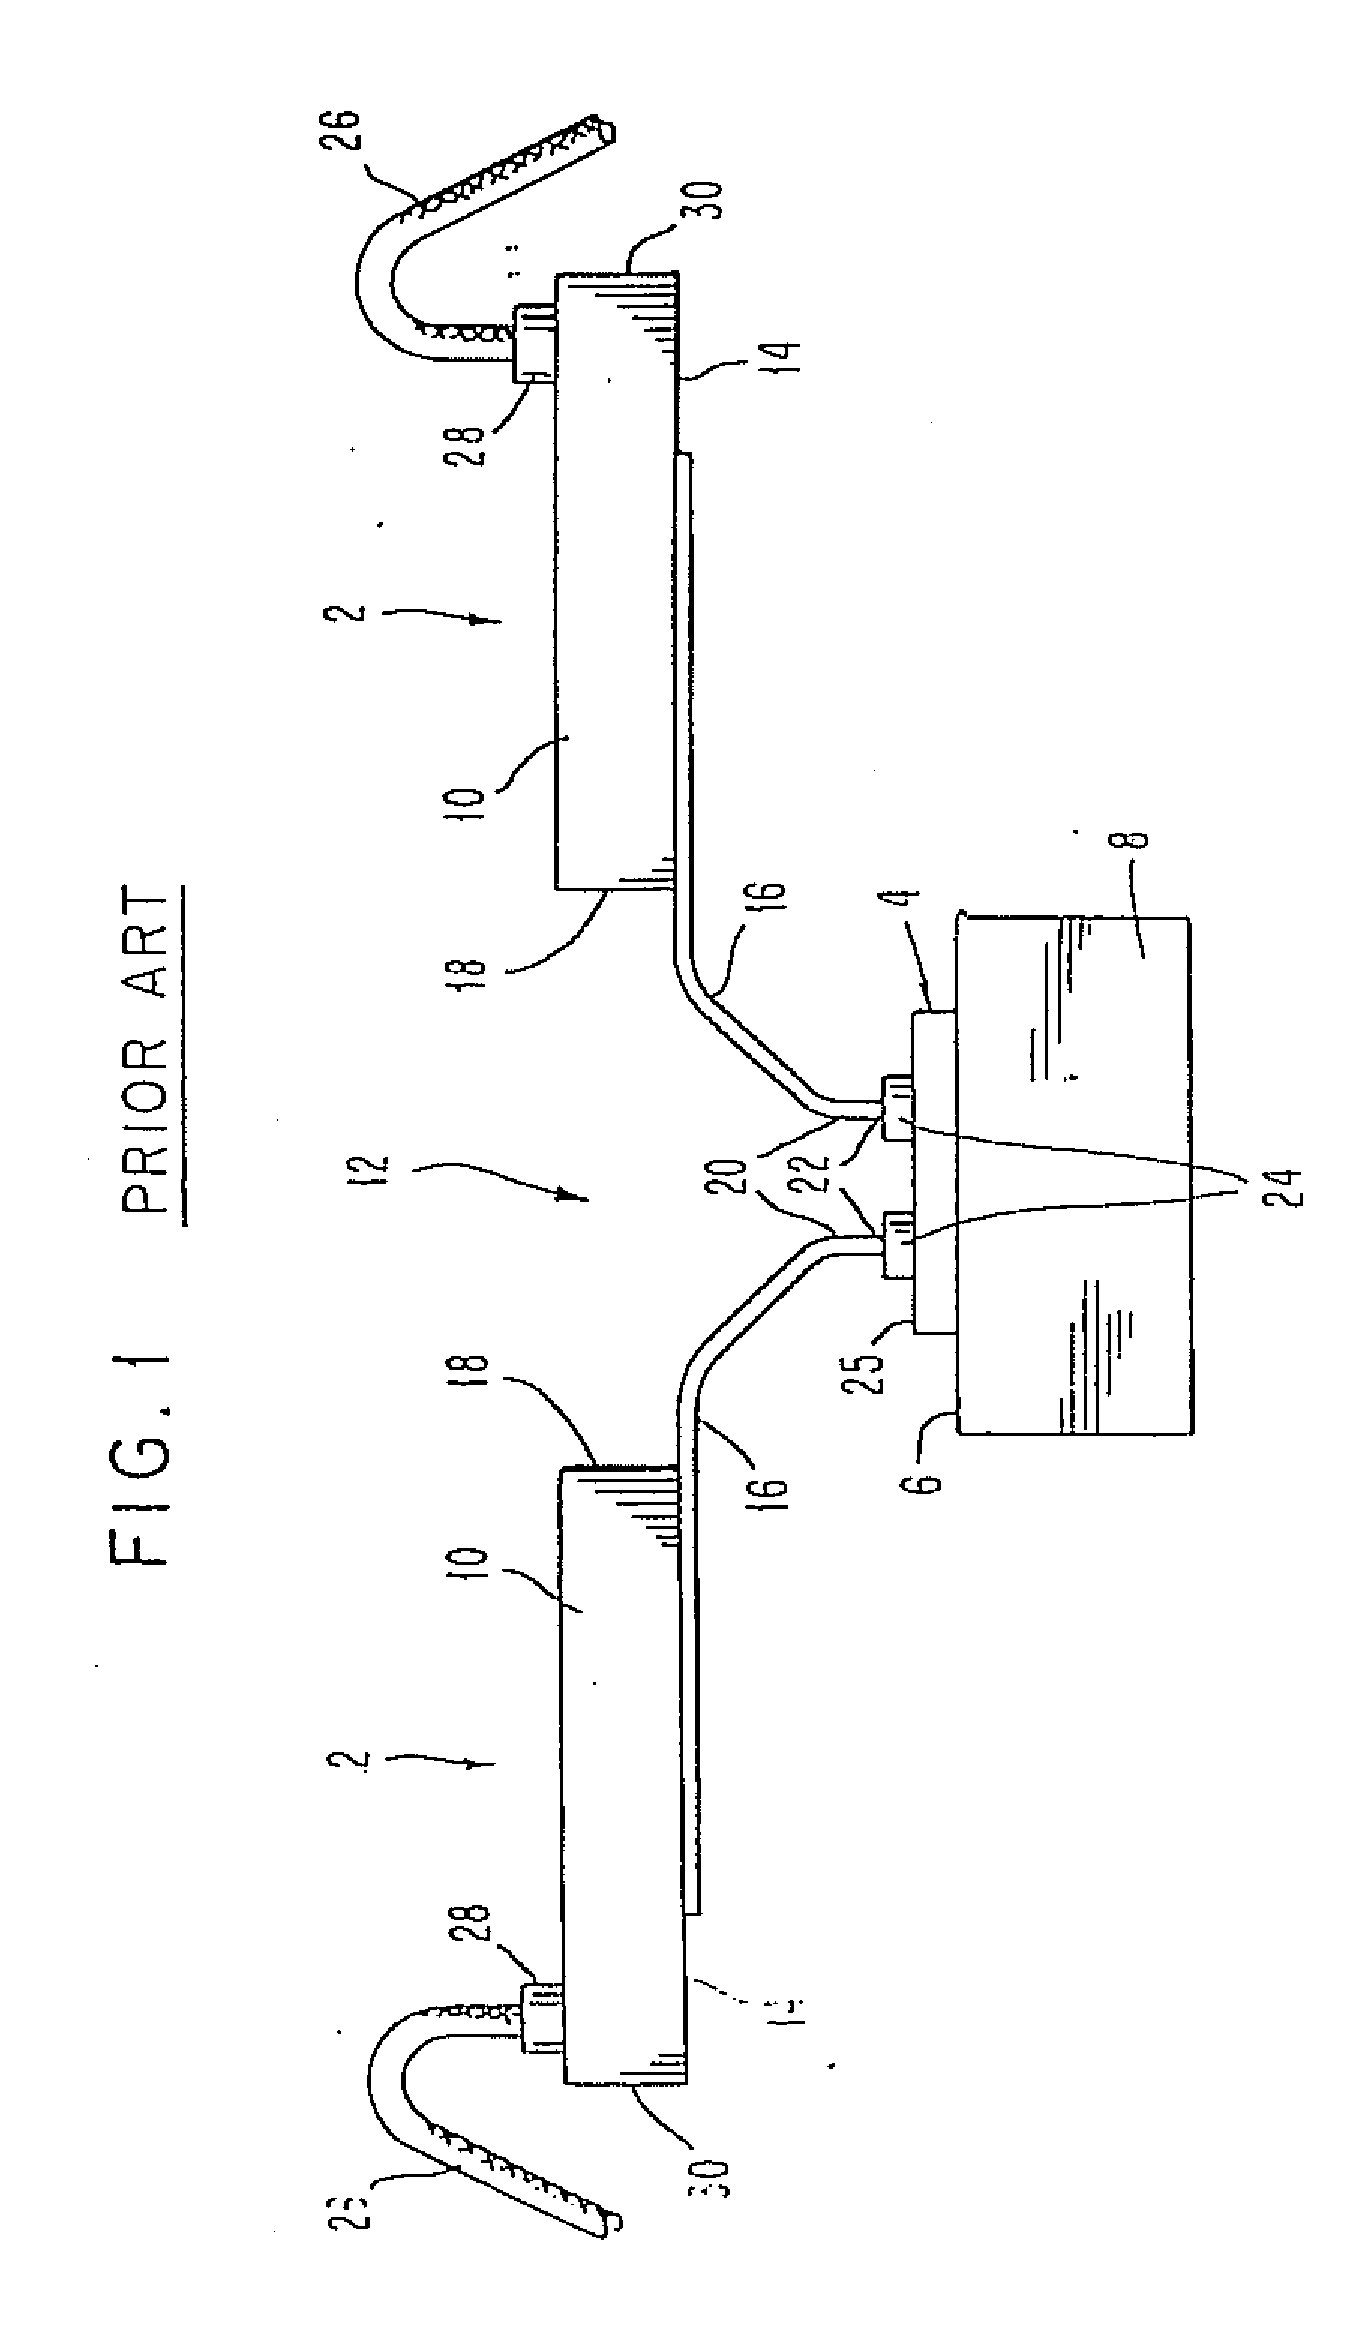 High density integrated circuit apparatus, test probe and methods of use thereof